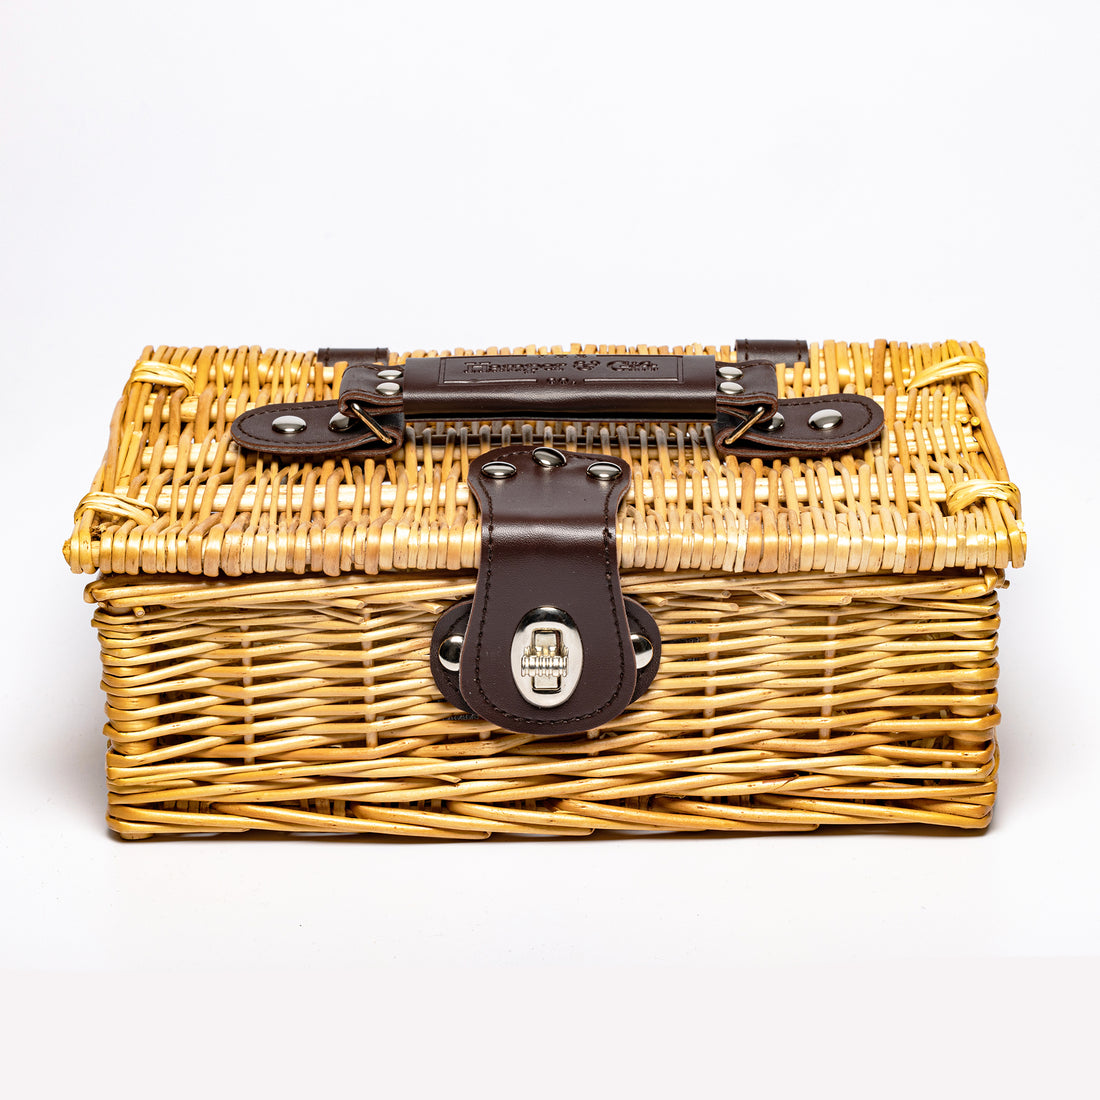 50th Birthday Hamper - A Chocolate Celebration of 50 Glorious Years